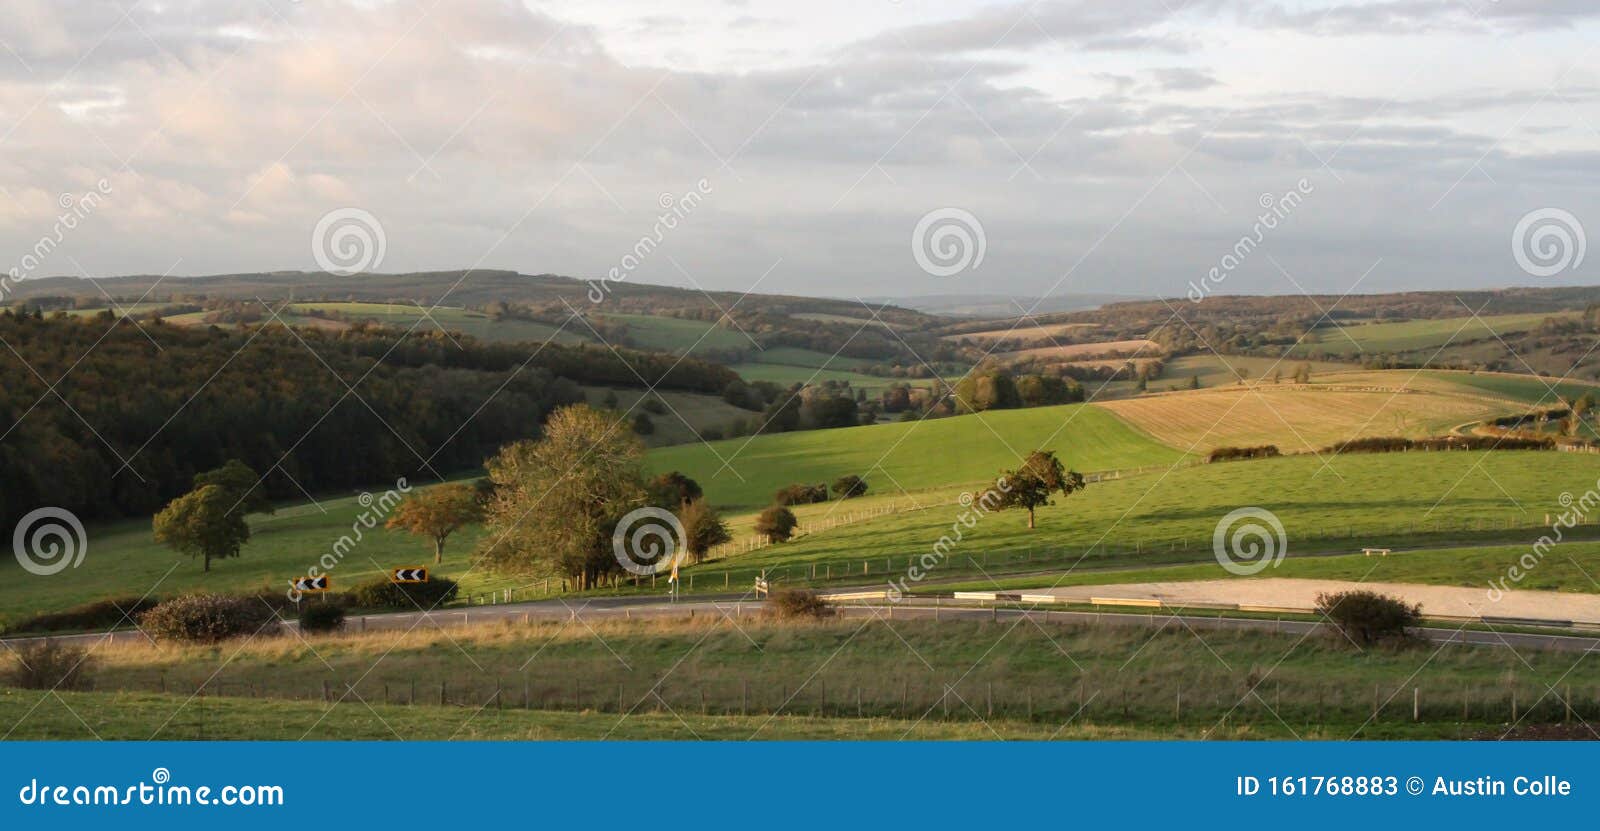 South Downs Near Goodwood Horse Racing Track In Southern England Stock Image - Image of goodwood ...